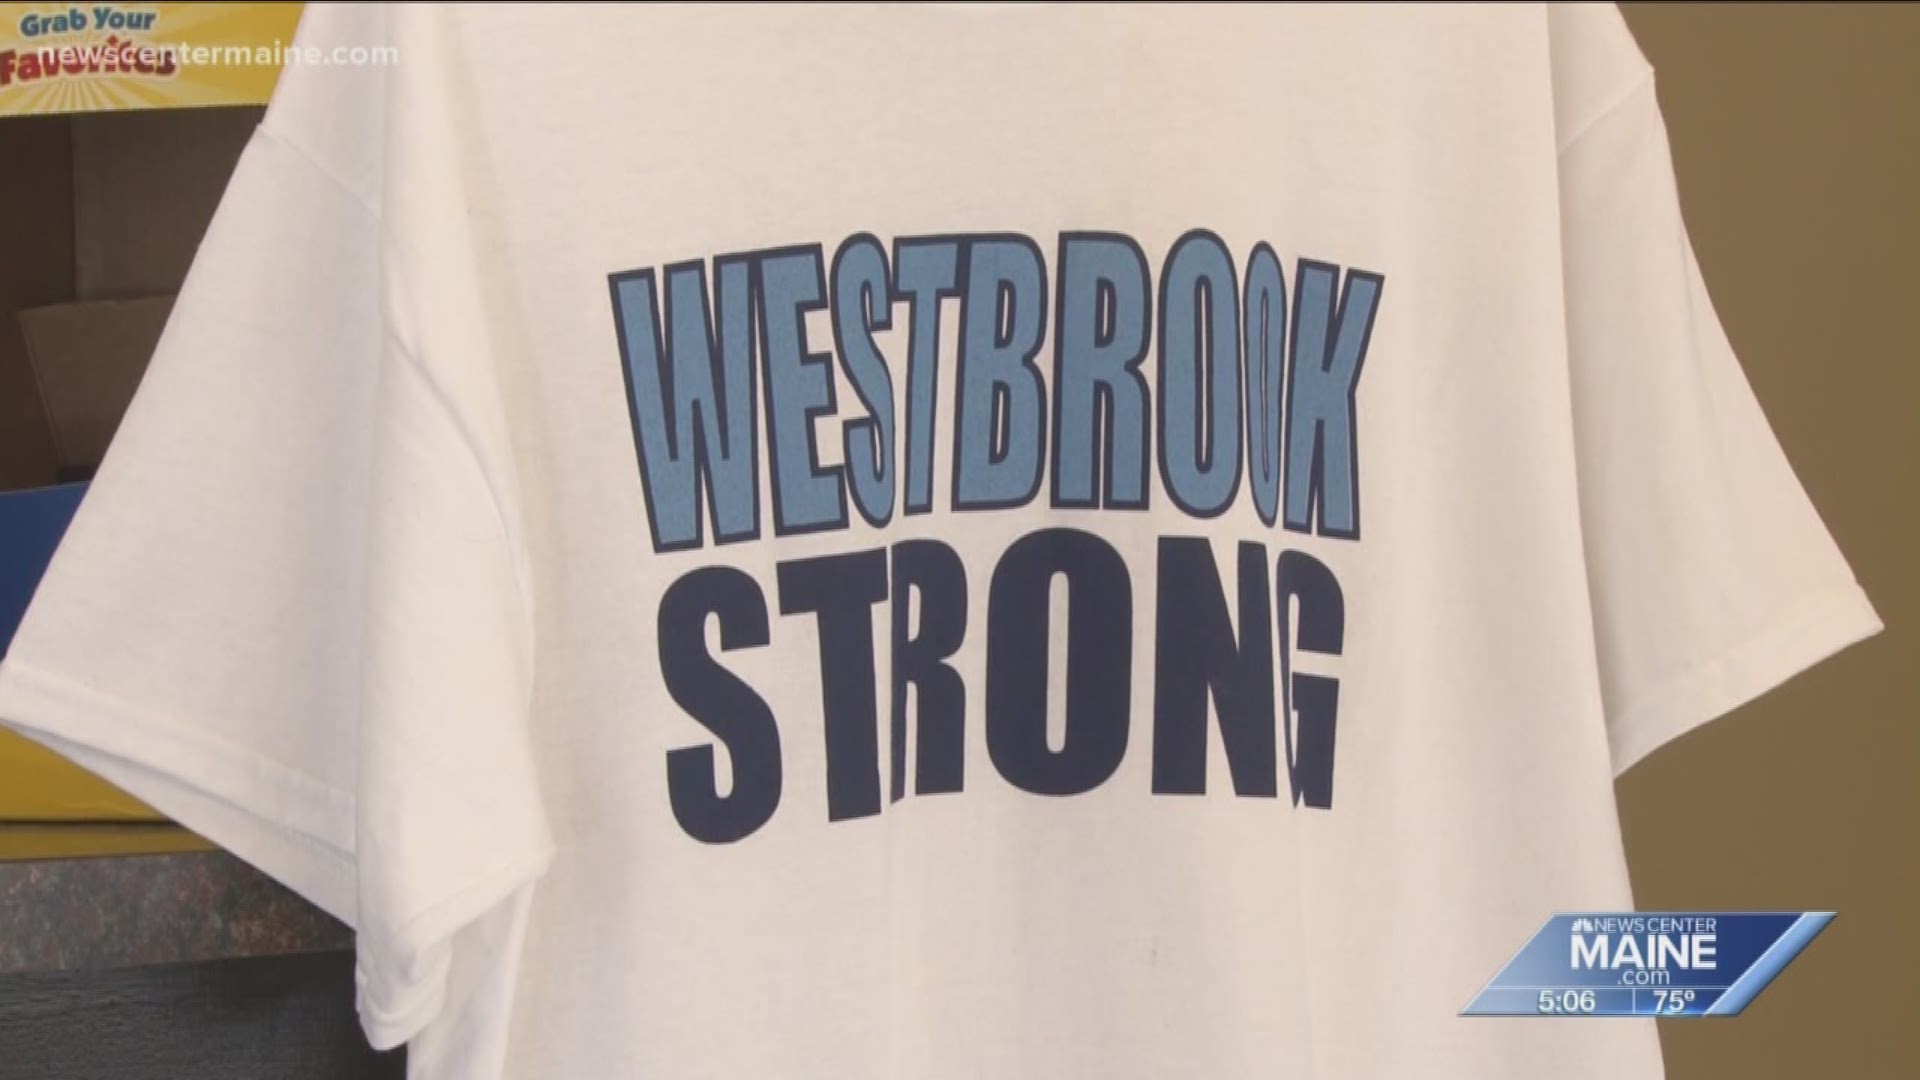 Westbrook Strong 5K is July 14